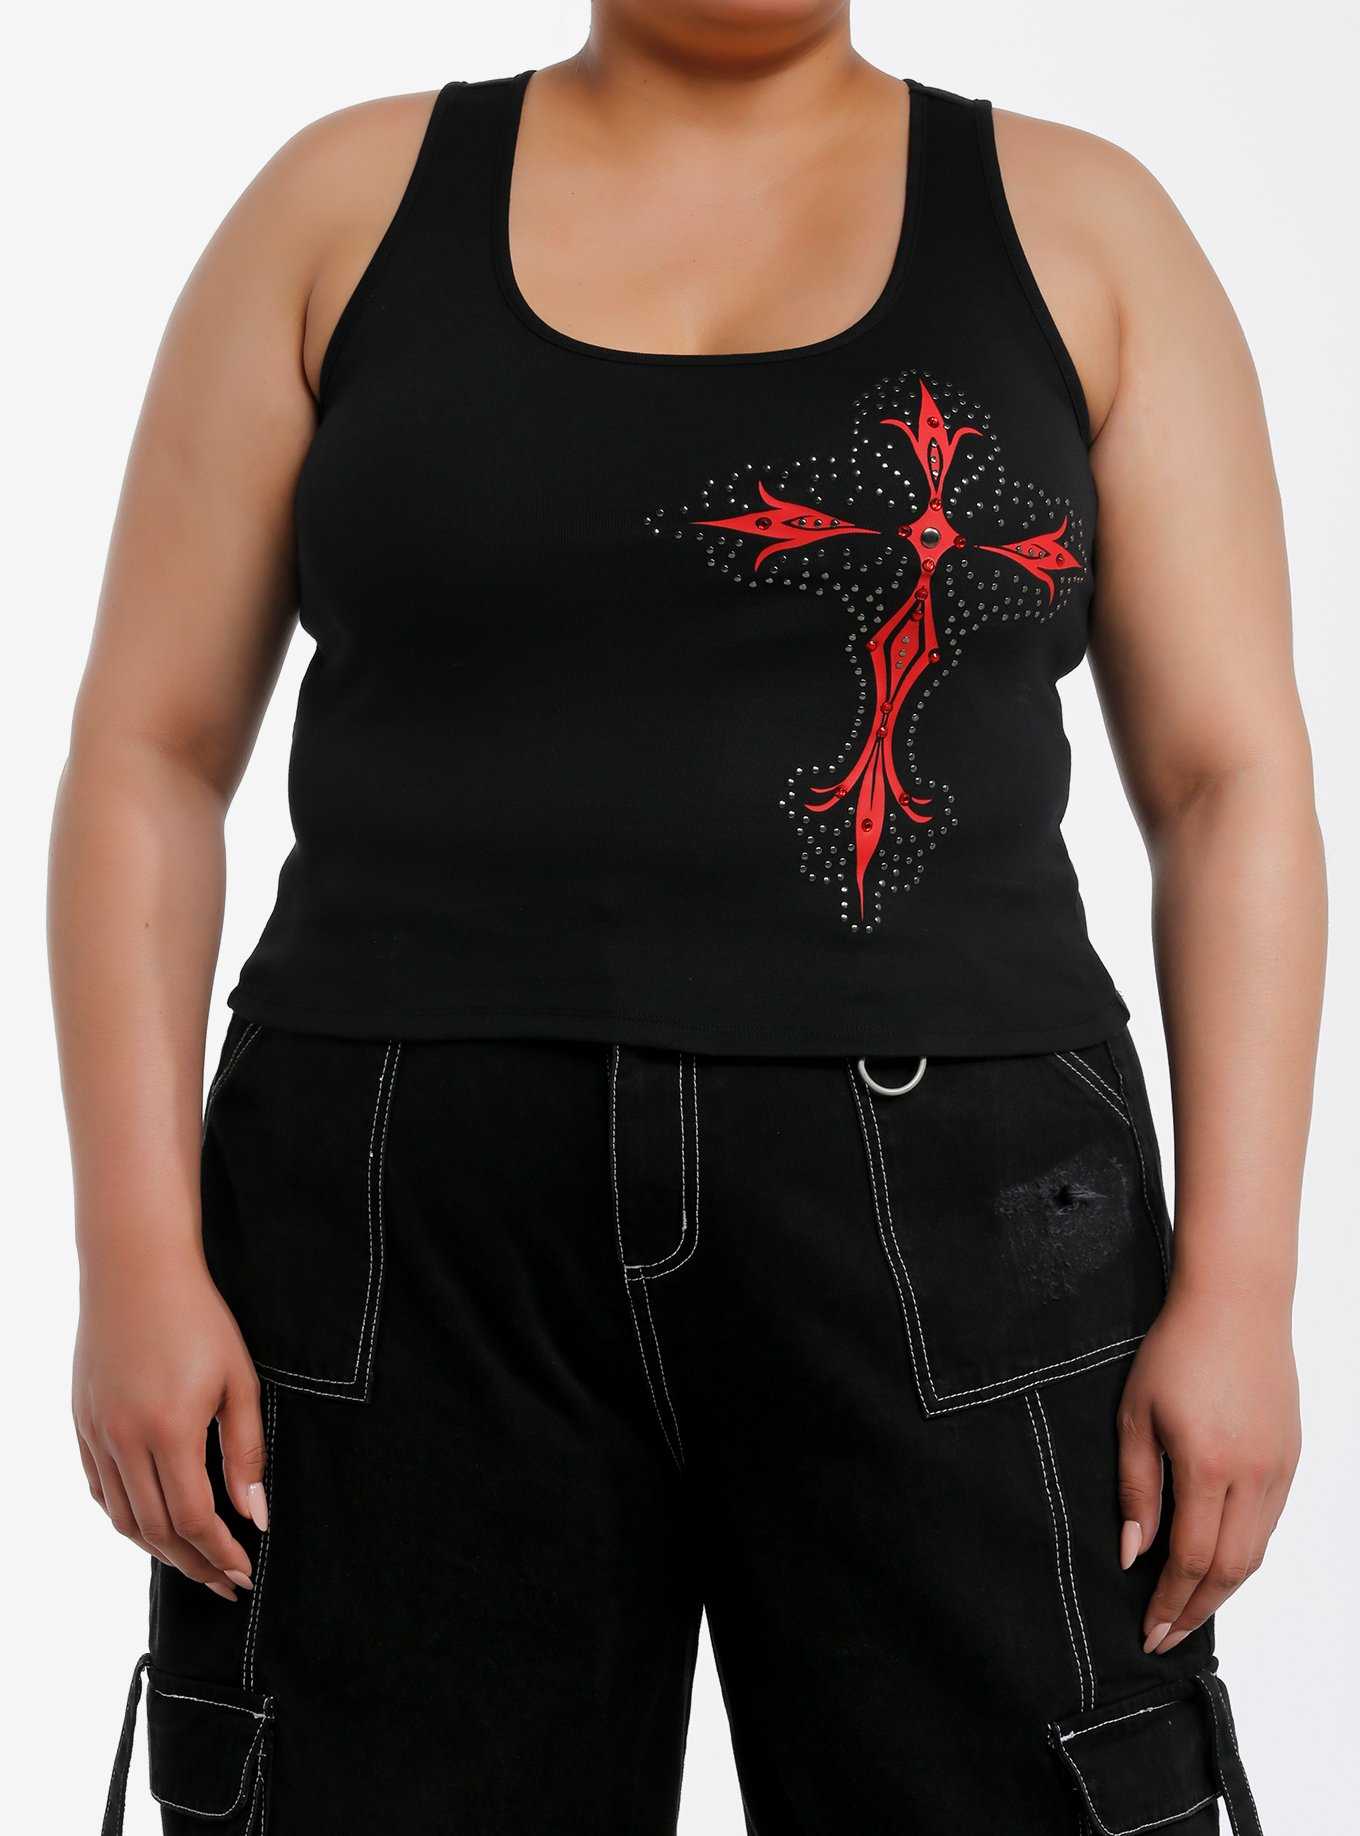 Social Collision Bedazzled Gothic Cross Girls Tank Top Plus Size, , hi-res